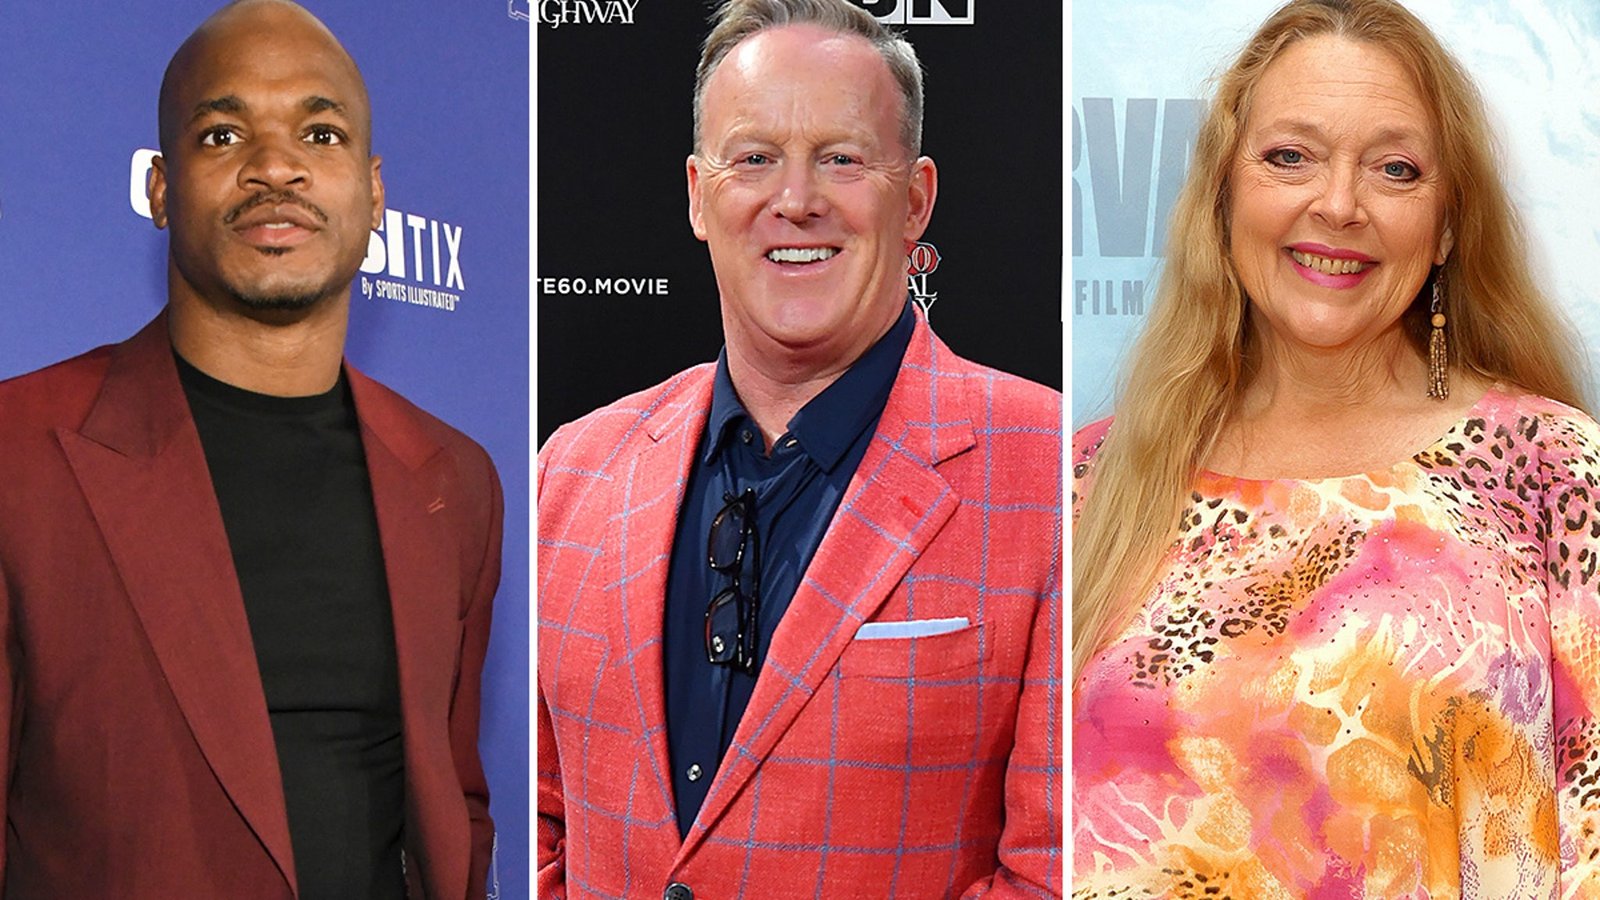 DWTS Producers Argue 'Clickbait' Casting Like Carole Baskin, Sean Spicer Has to Be Finished